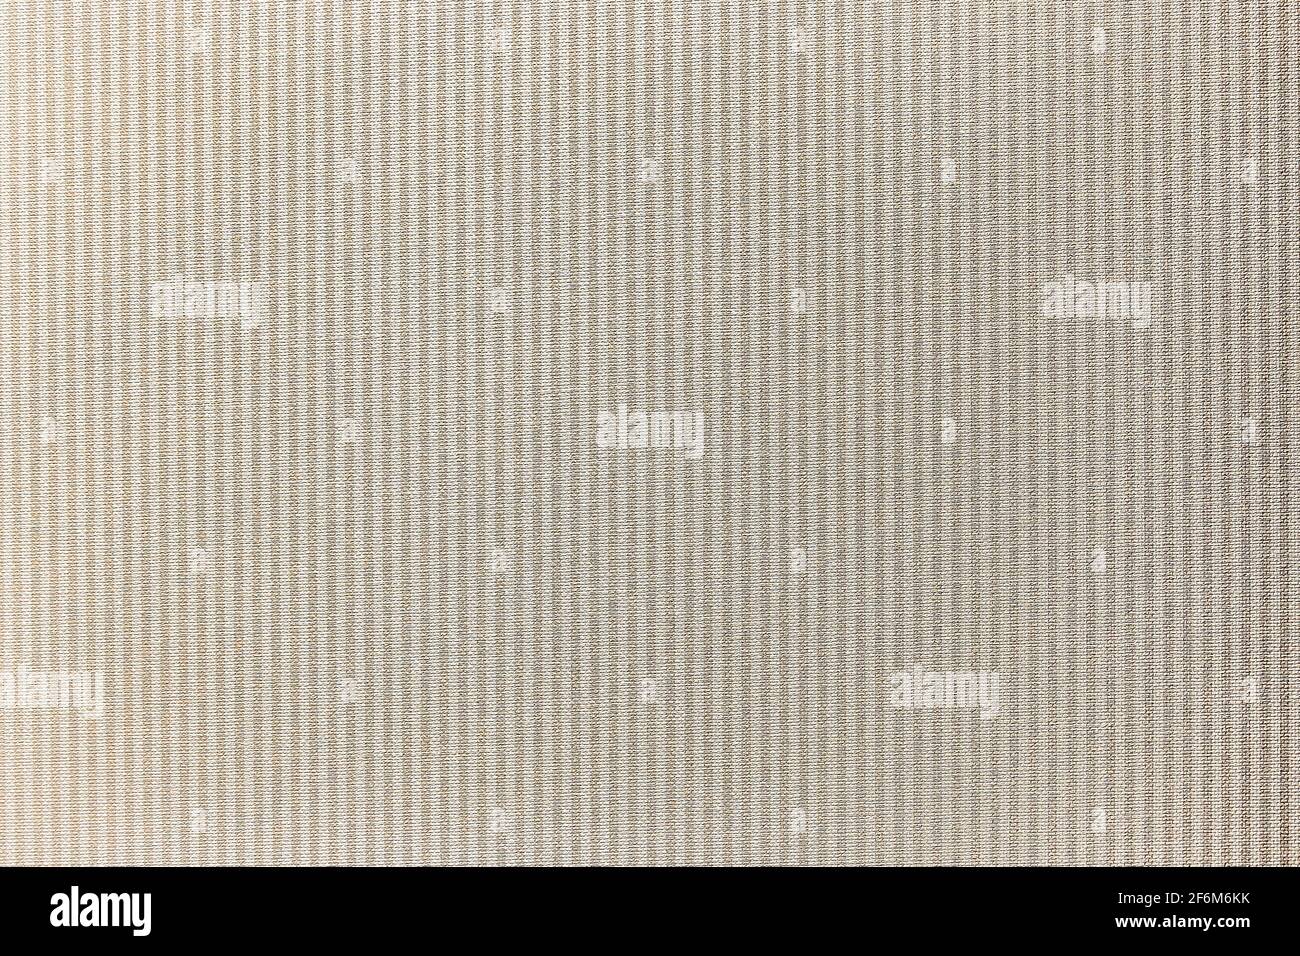 Texture of light beige abstract wallpaper with a pattern of vertical ...